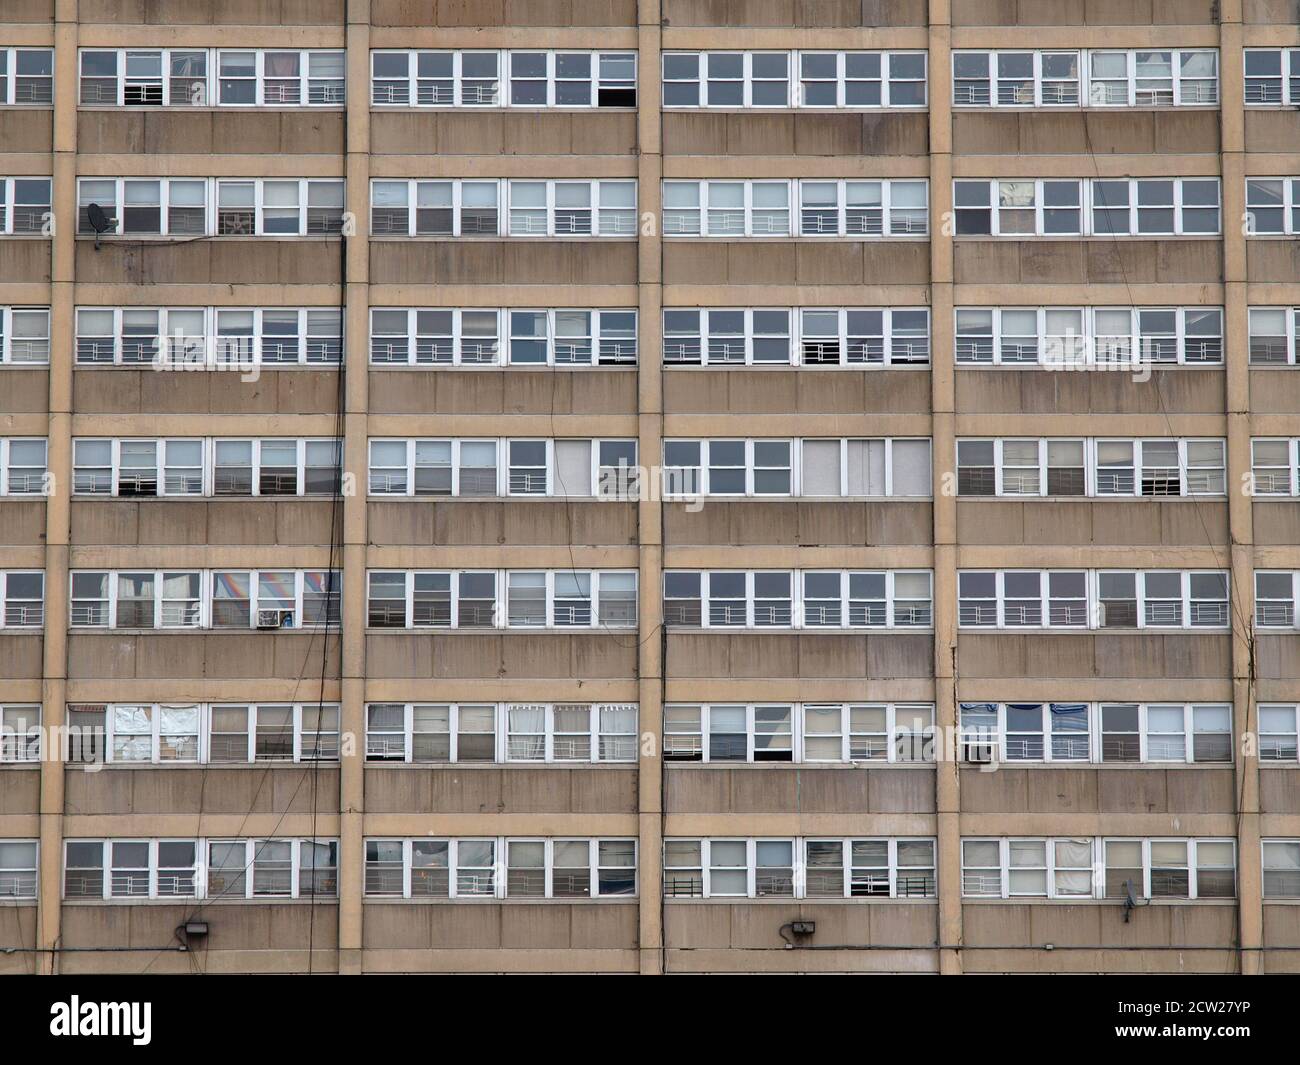 Archival 2009 view of windows at the Caprini Green public housing project tower in Chicago Illinois.   Tower was torn down in 2010. Stock Photo